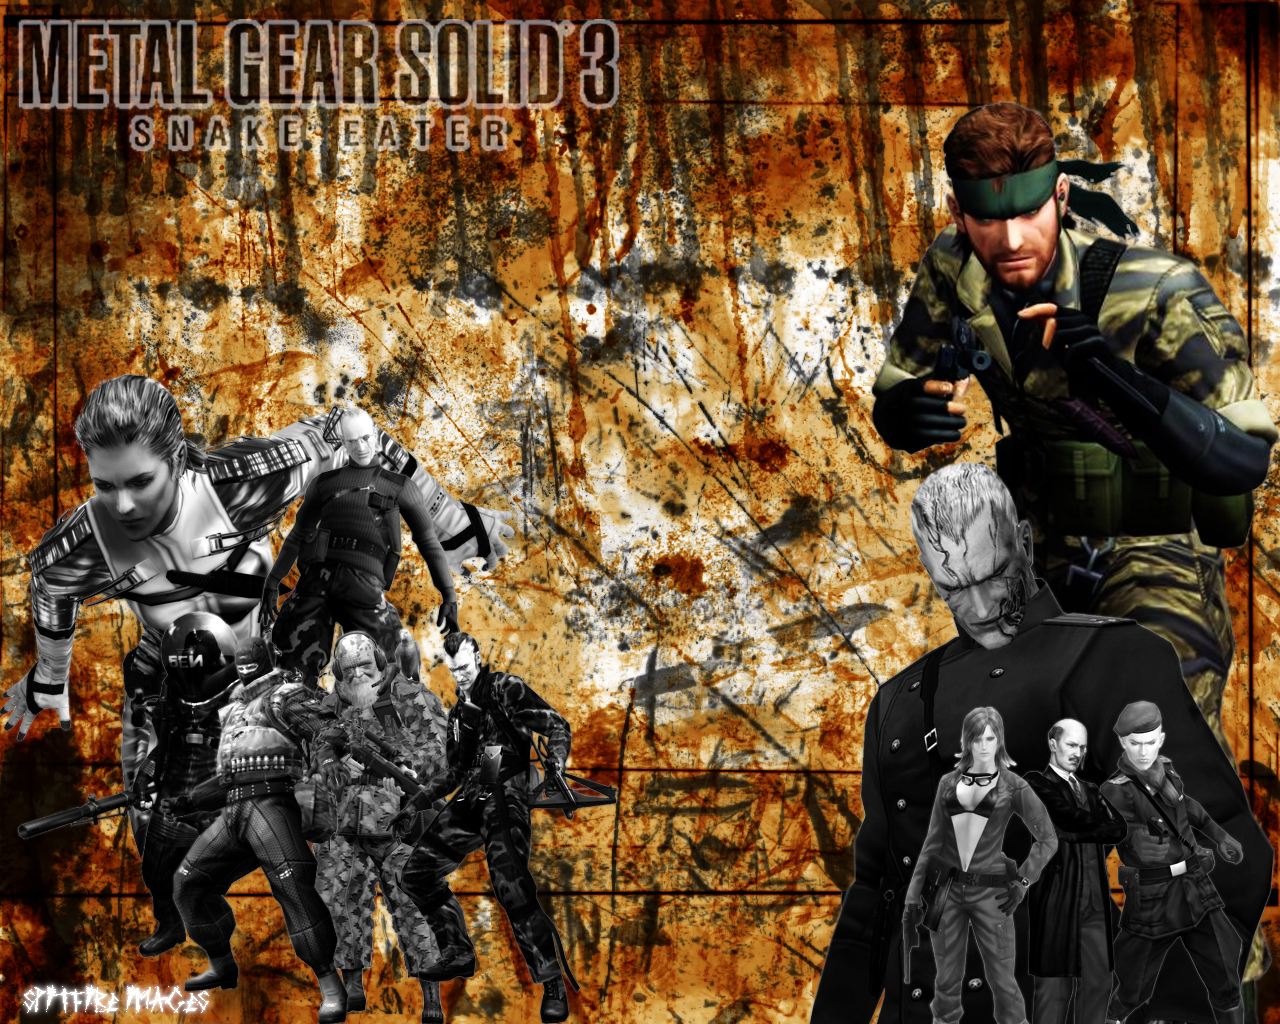 MGS 3 Snake Eater Wallpaper by Spitfire666xXxXx on